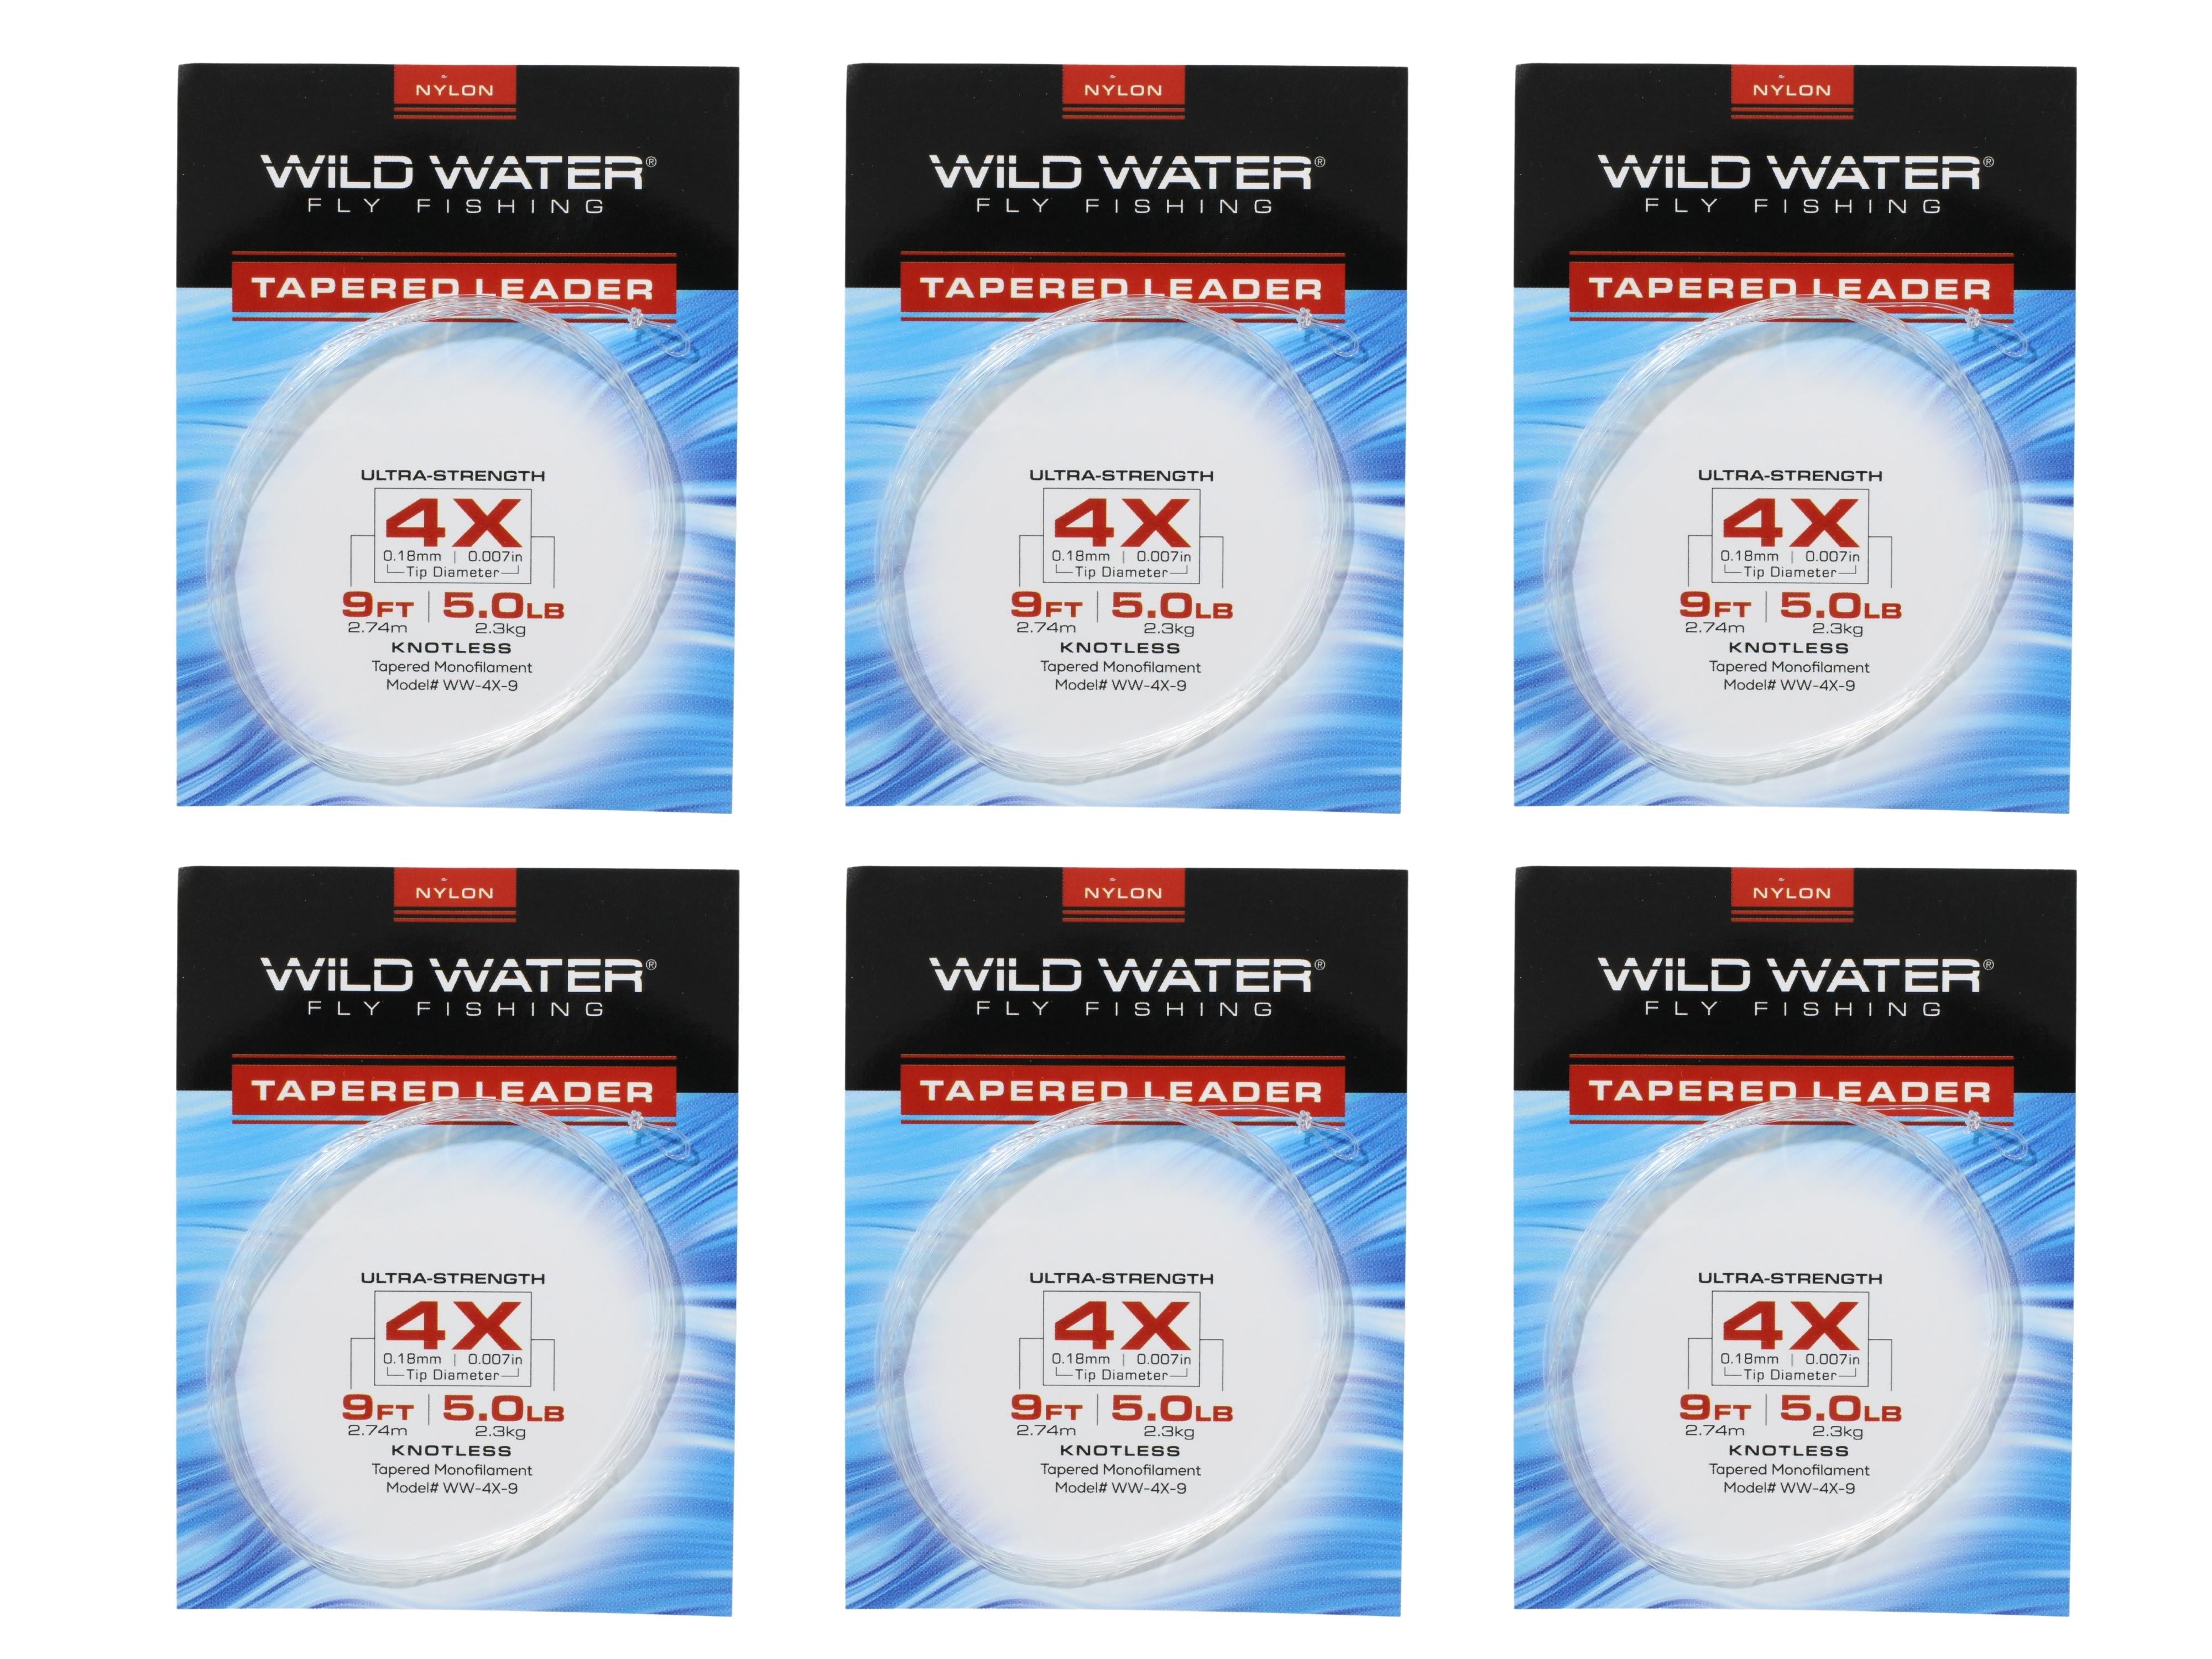 Wild Water Fly Fishing 9' Tapered Monofilament Leader 4X, 6 Pack